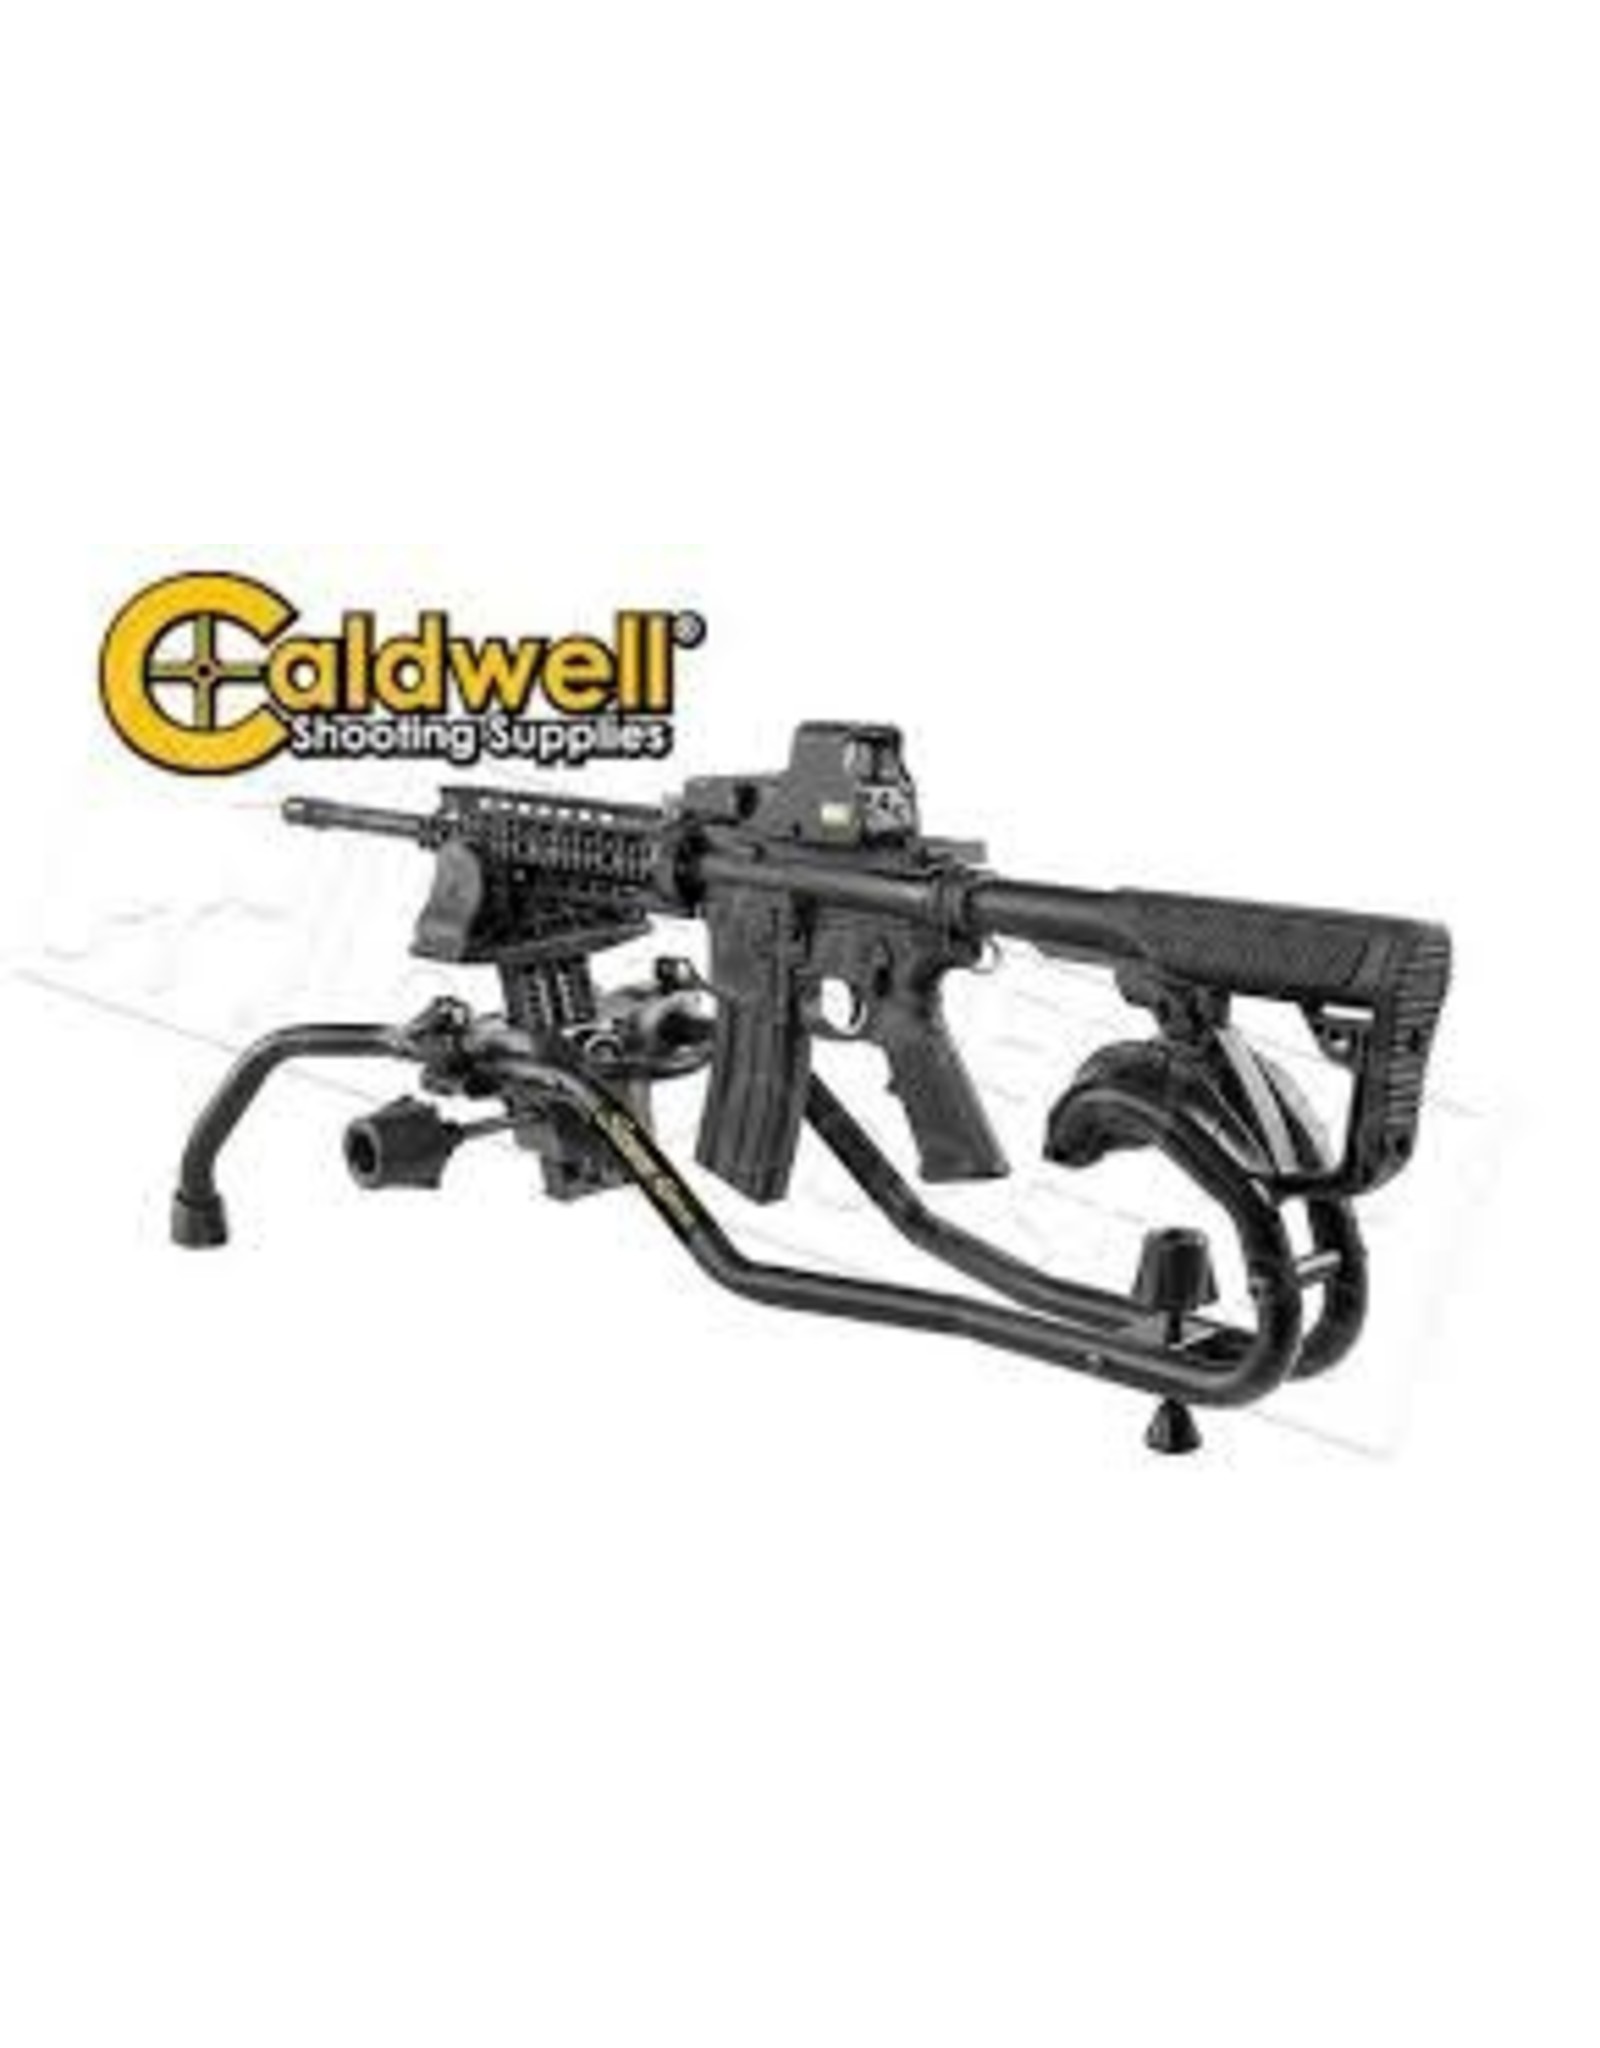 Caldwell CALDWELL 110033 STINGER SHOOTING REST